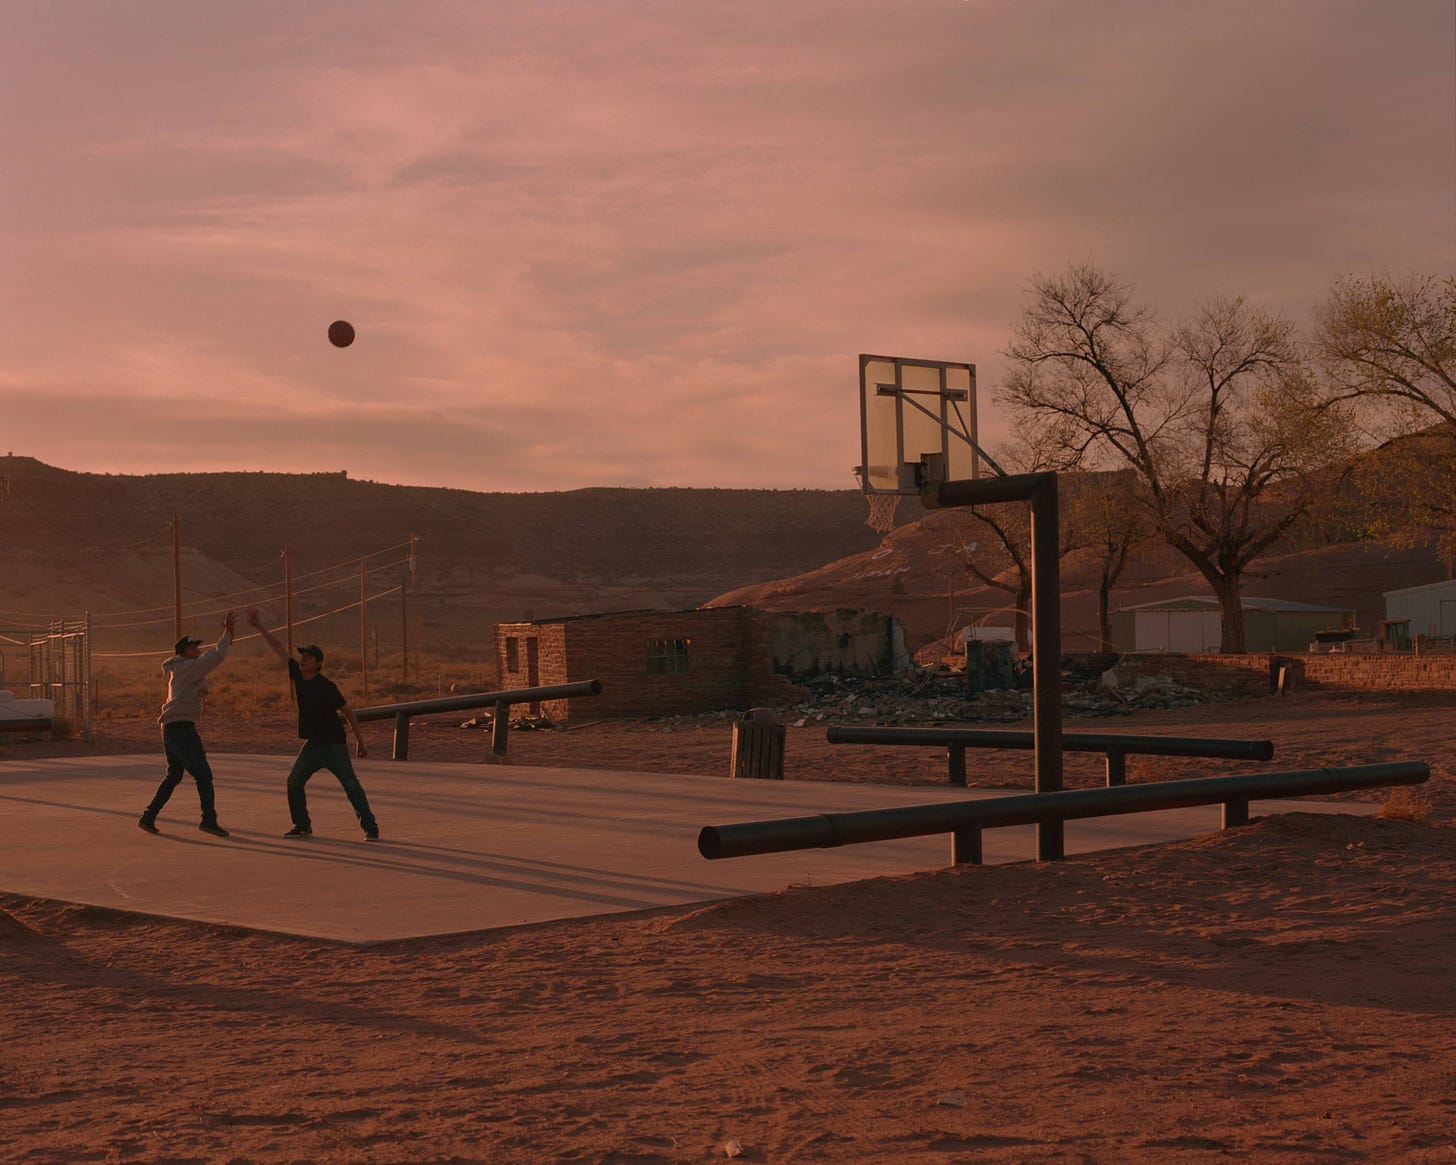 Teenage brothers Deion Salazar and Syrus Yazzieplay basketball in Oljato, Utah - a few miles from Monument Valley. Oljato was a major source for uranium mining in the 1940's and 50's causing serious health concerns for many of its residents.